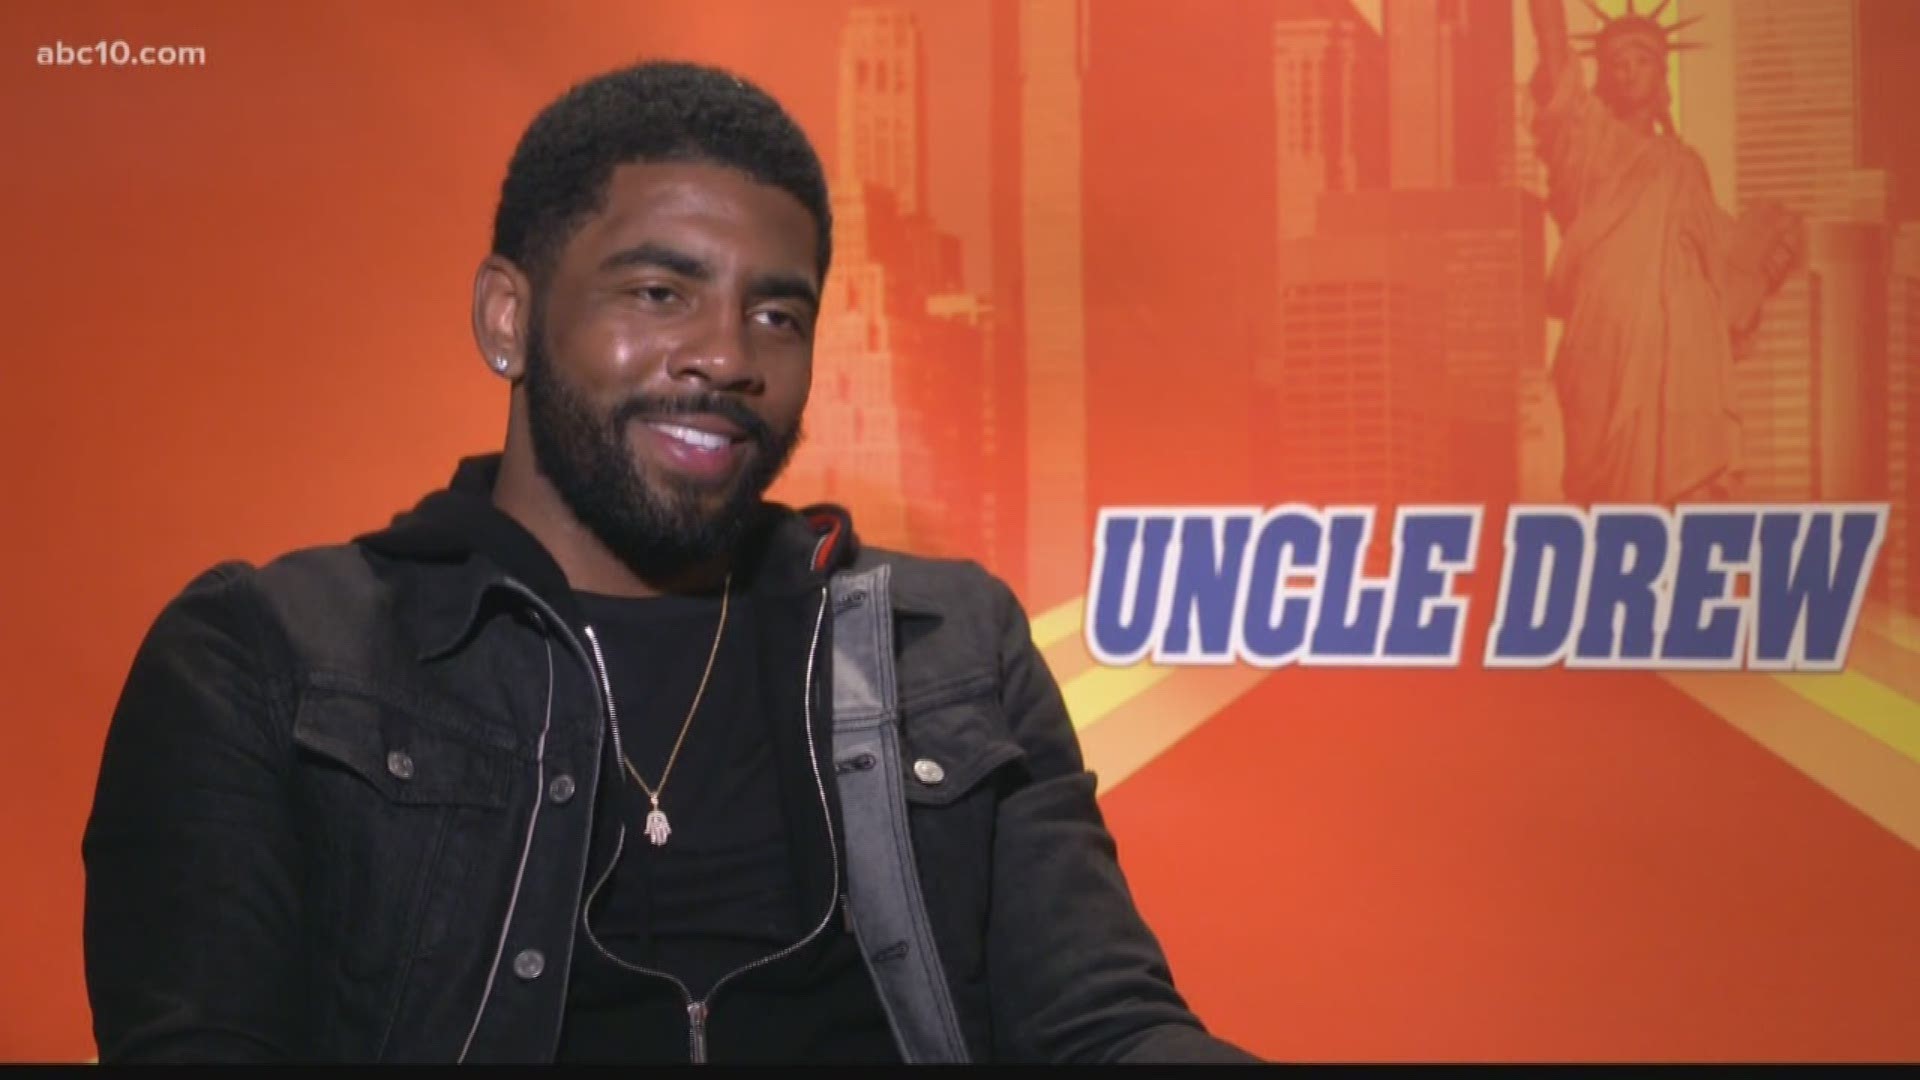 Kyrie Irving's 'Uncle Drew' Movie Failed to Live up to Expectations